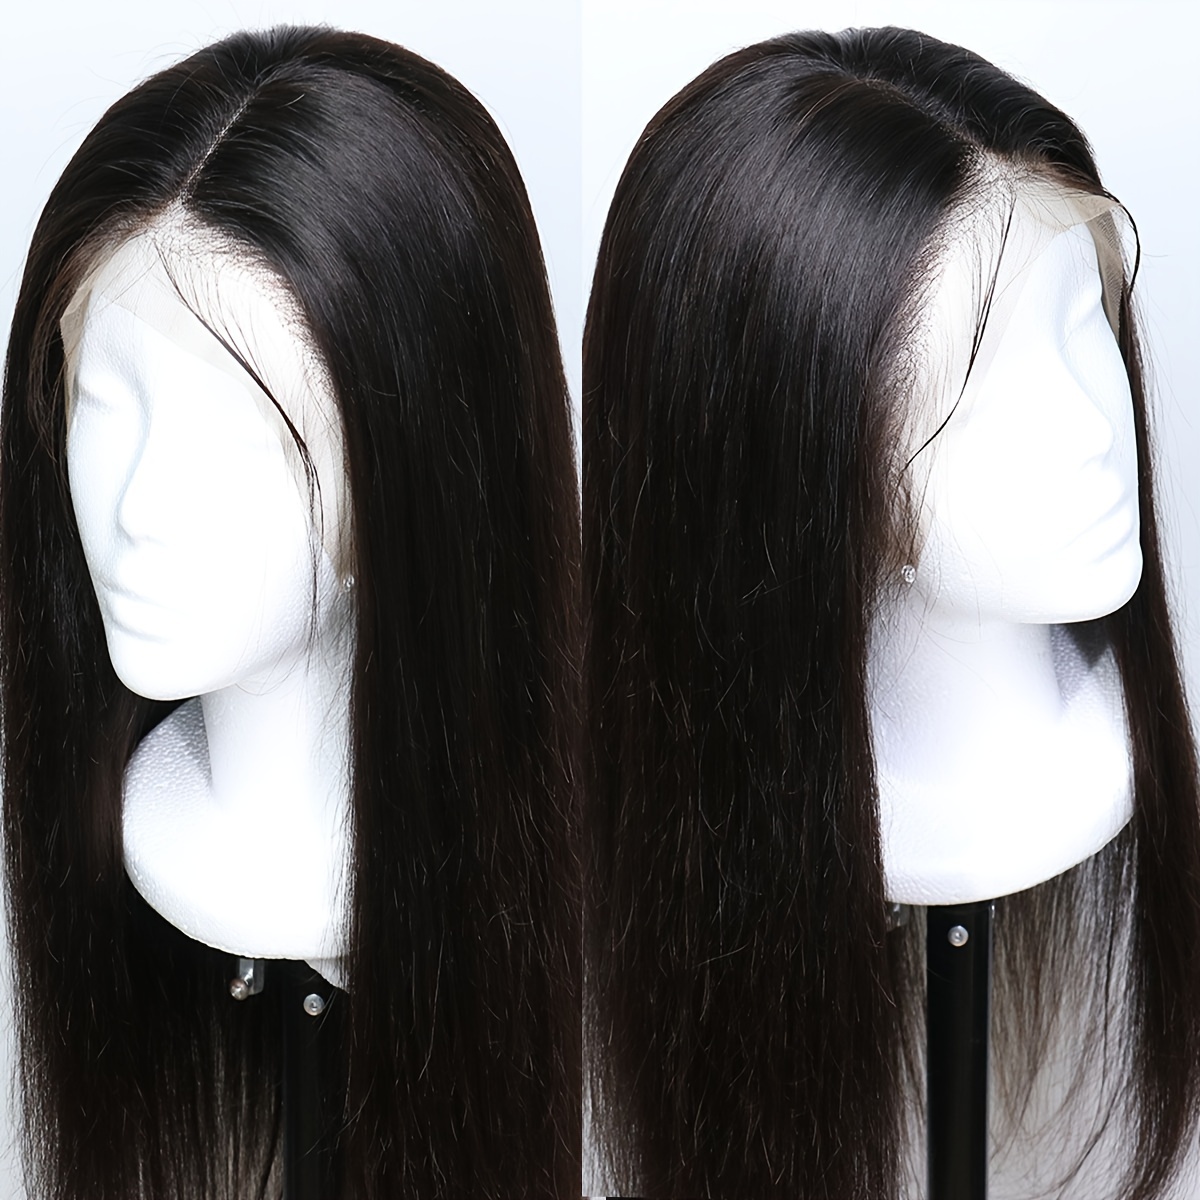 

26 Inch Black Long Straight Lace Front Wigs For Women Glueless Wigs With Pre Plucked Hairline Heat Resistant Synthetic Lace Front Wig For Daily Party Use